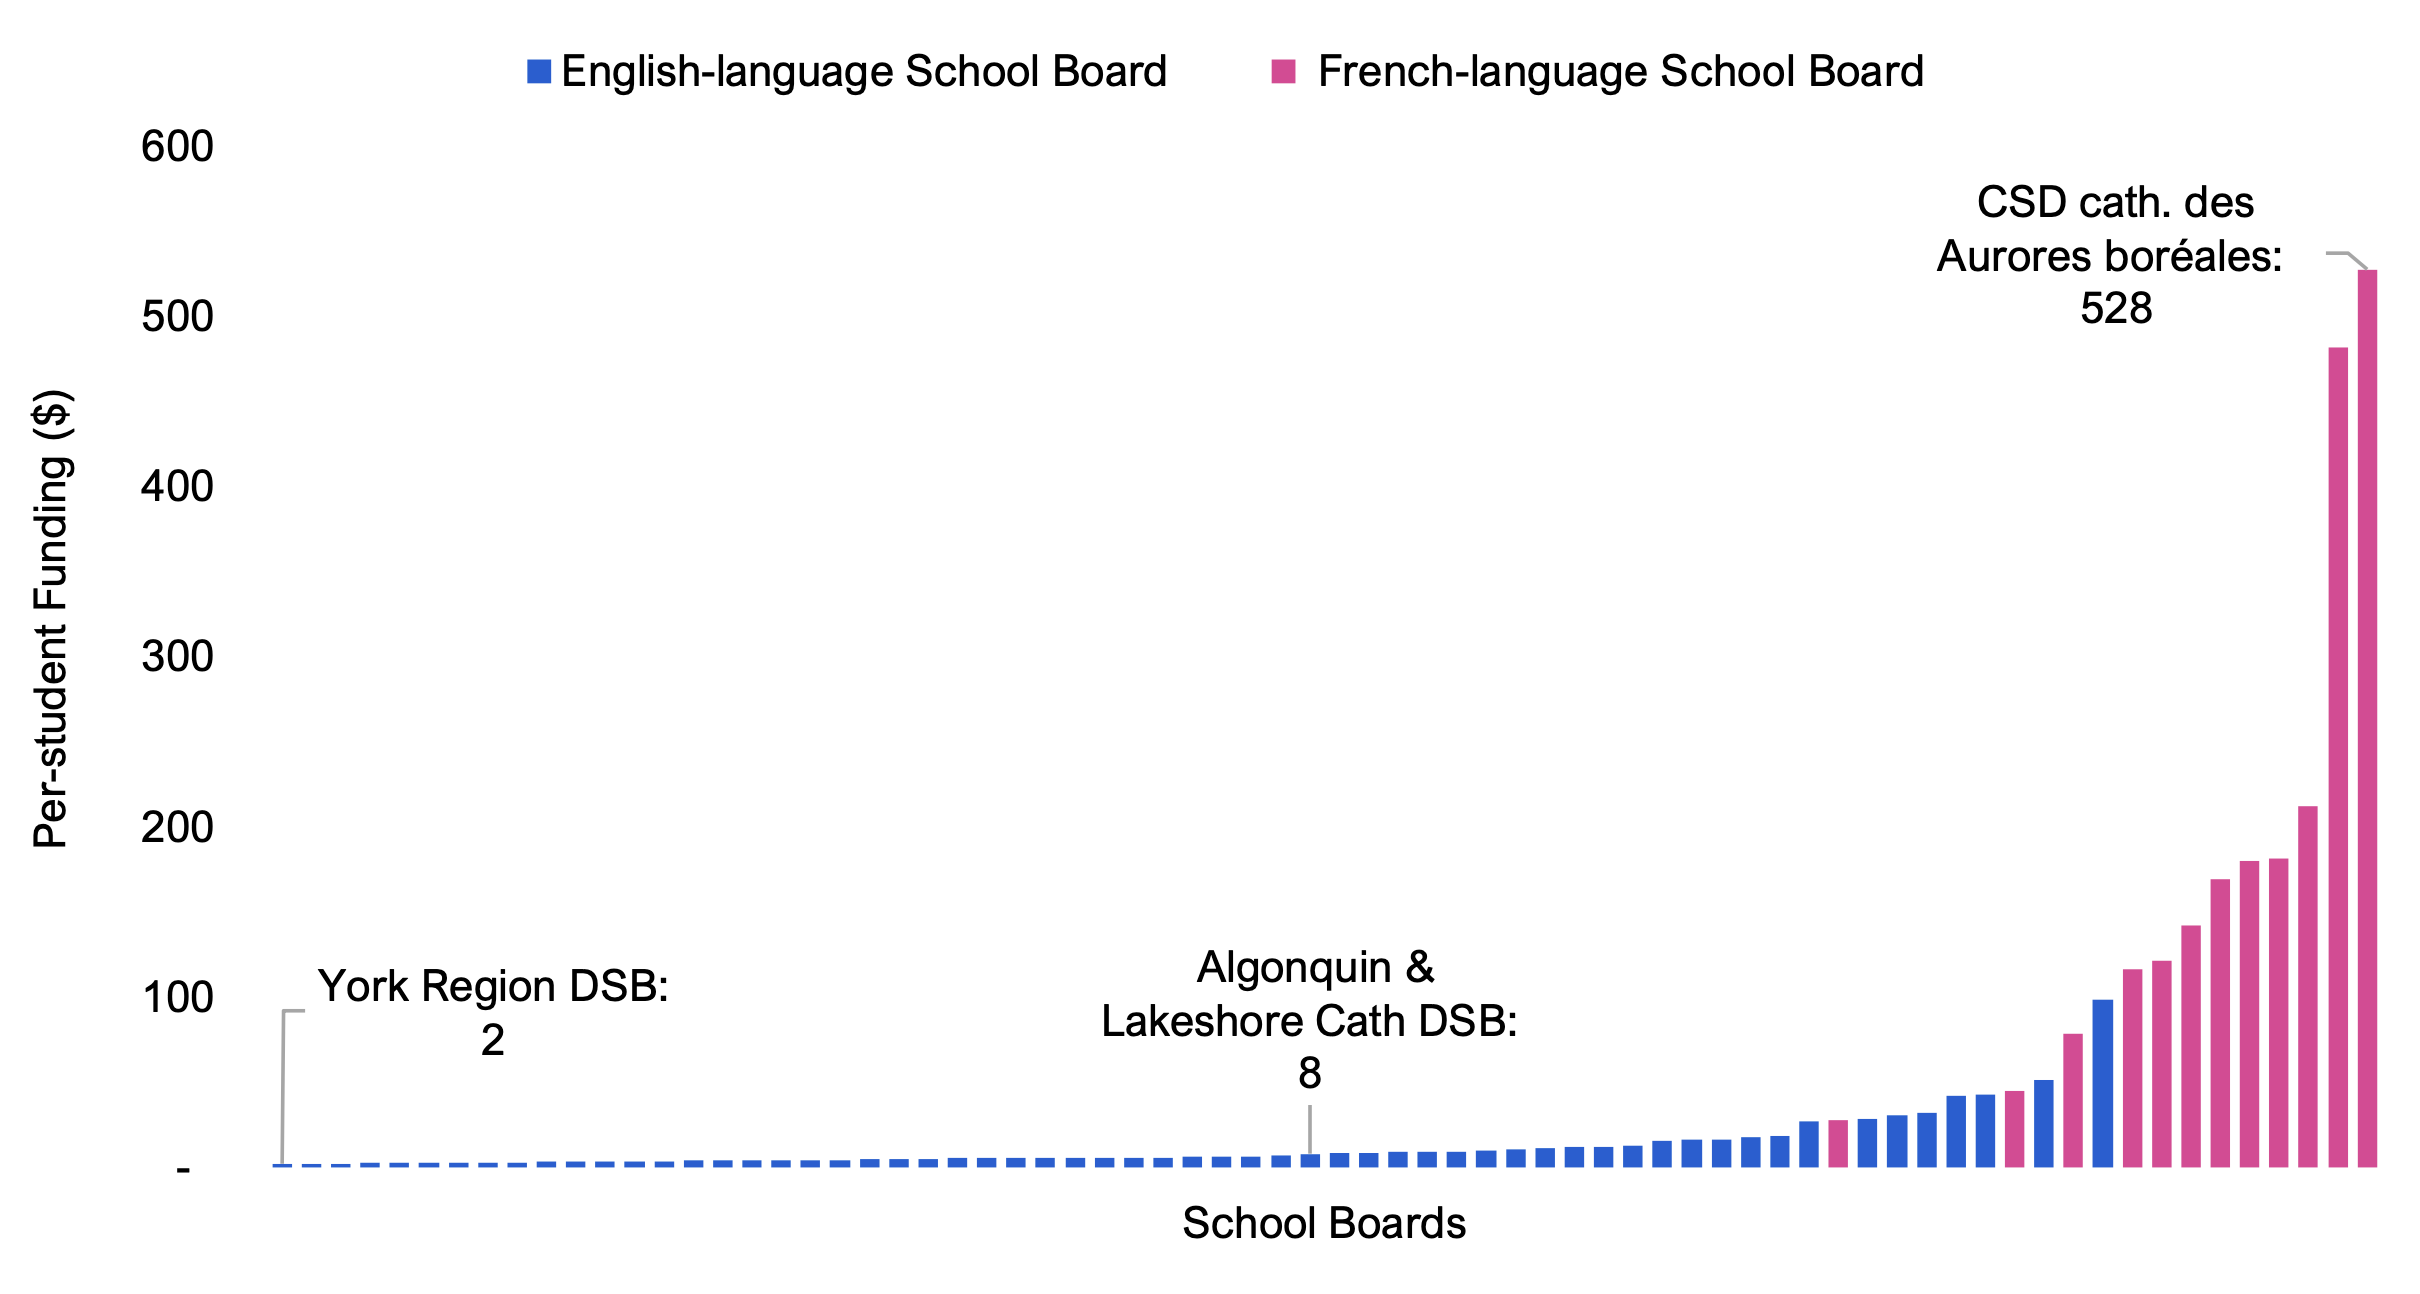 Figure 4.11 shows per-student Official Languages Projects program funding by school board, broken down by English-language and French-language. The values range from a low of $2 for the York Region DSB to a high of $528 for the CSD catholique des Aurores boréales. On average, French-language school boards received higher per-student Official Languages Projects program funding than English-language school boards.